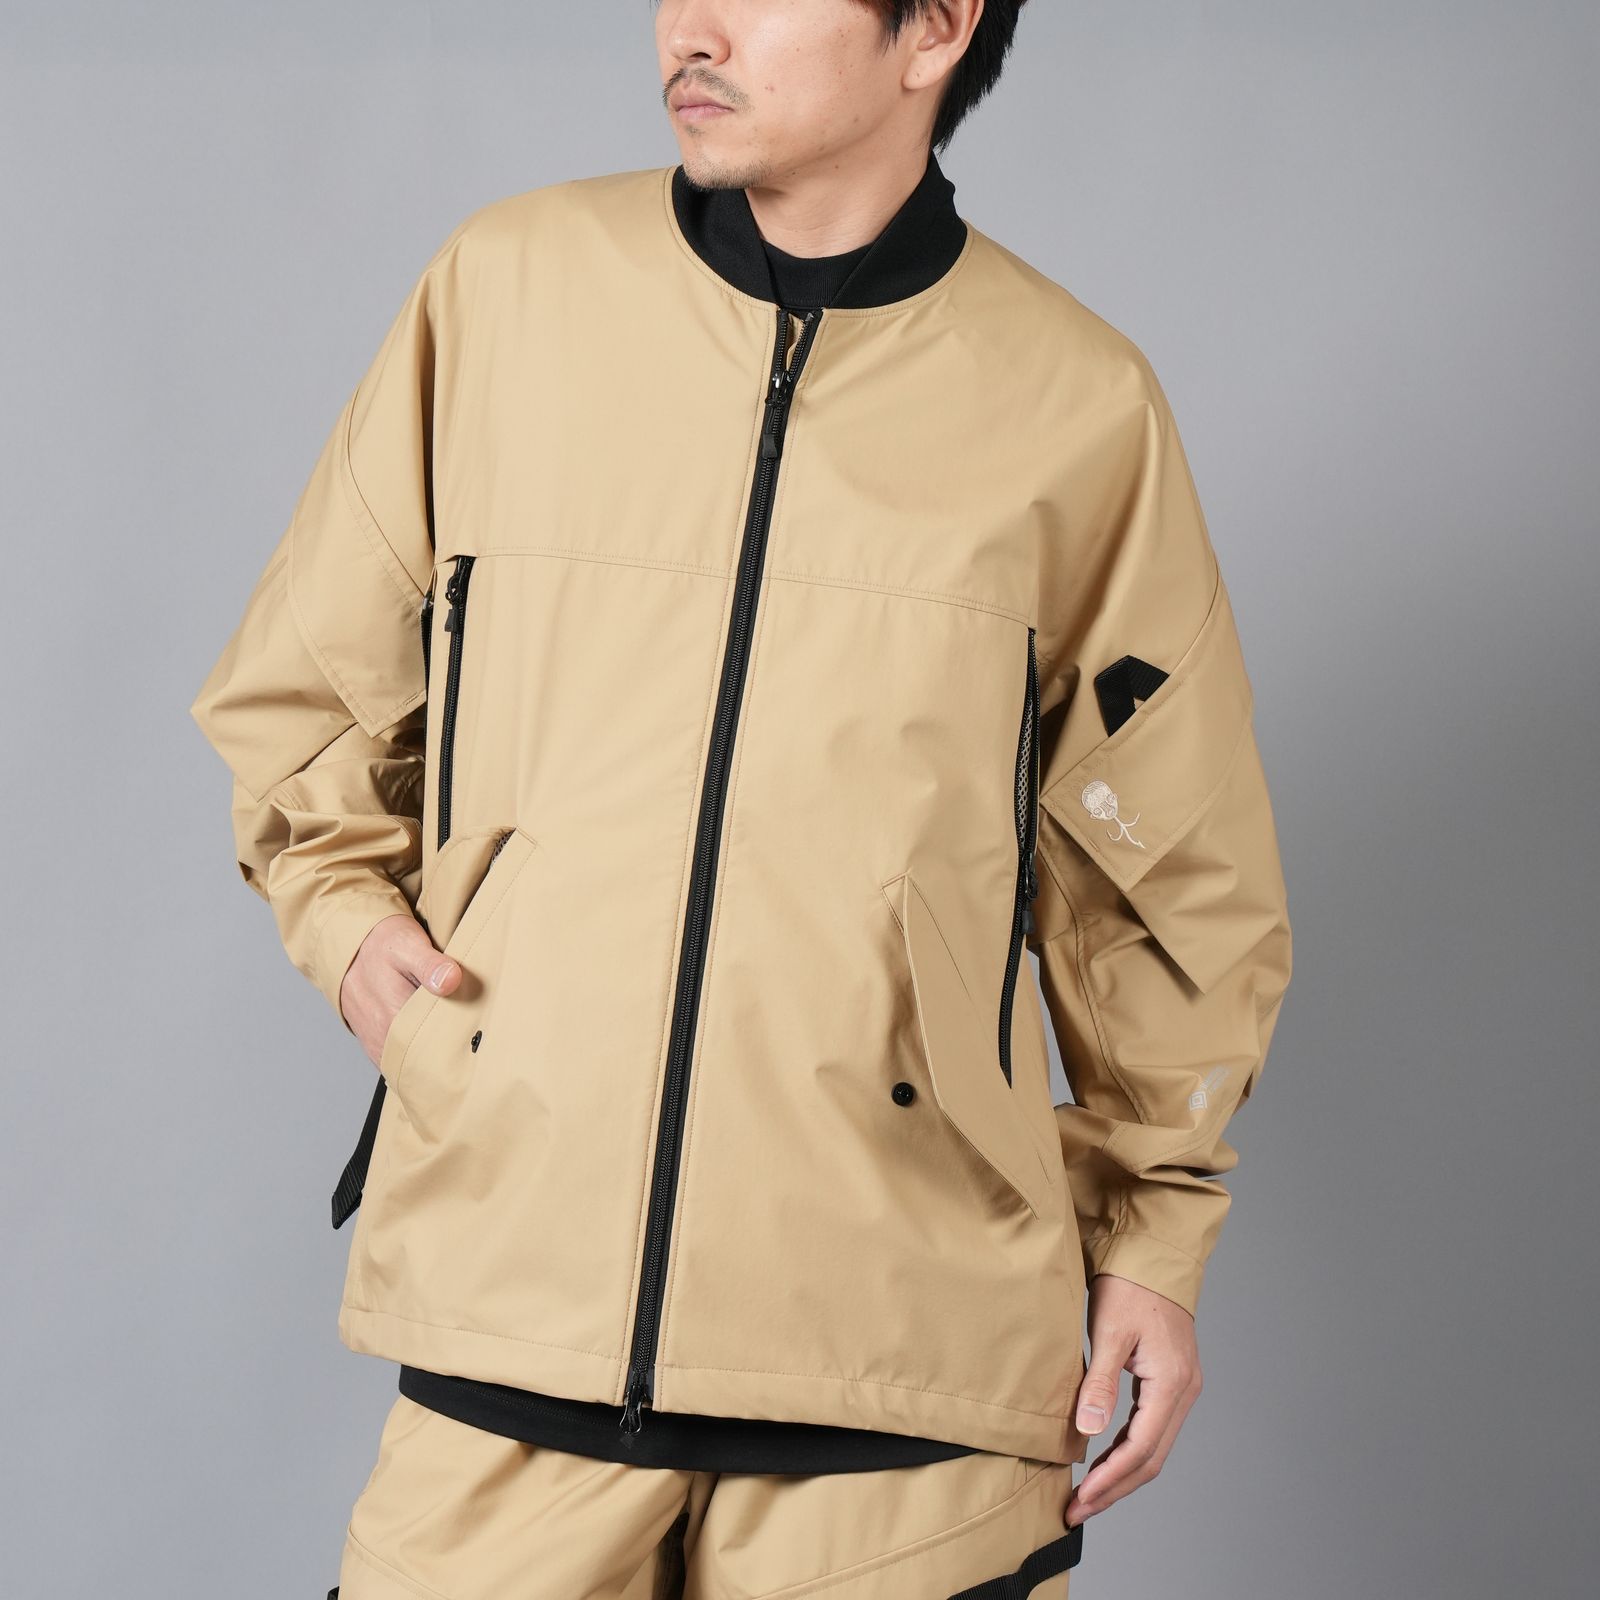 D-VEC - 【ラスト1点】 WINDSTOPPER BY GORE-TEX LABS 3L S.R.G.SHIRTS ...